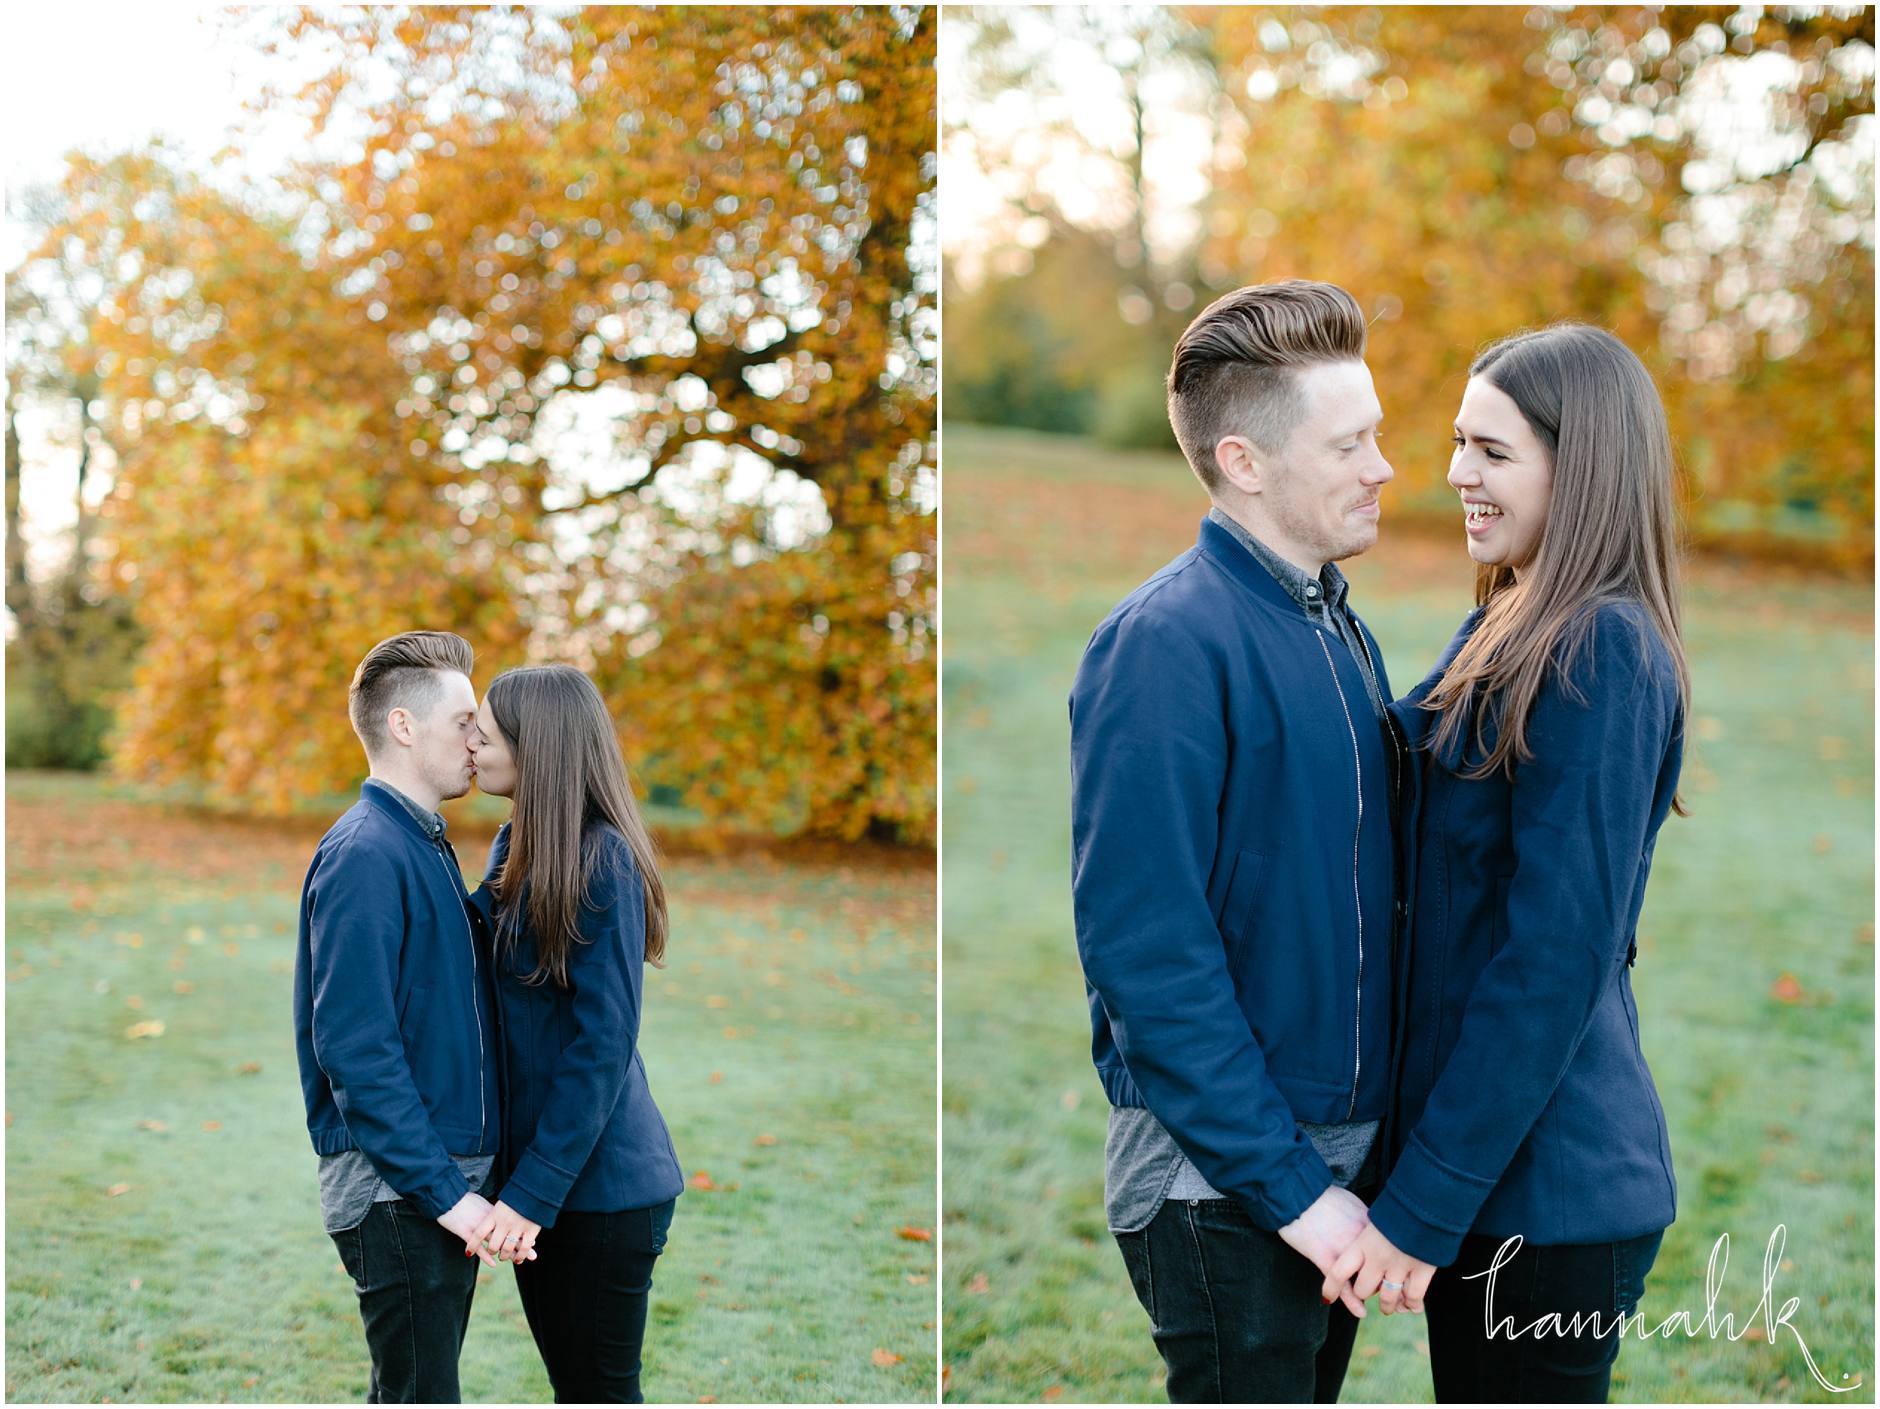 hannah-k-photography-coventry-warwickshire-west-midlands-engagement-photographer-47